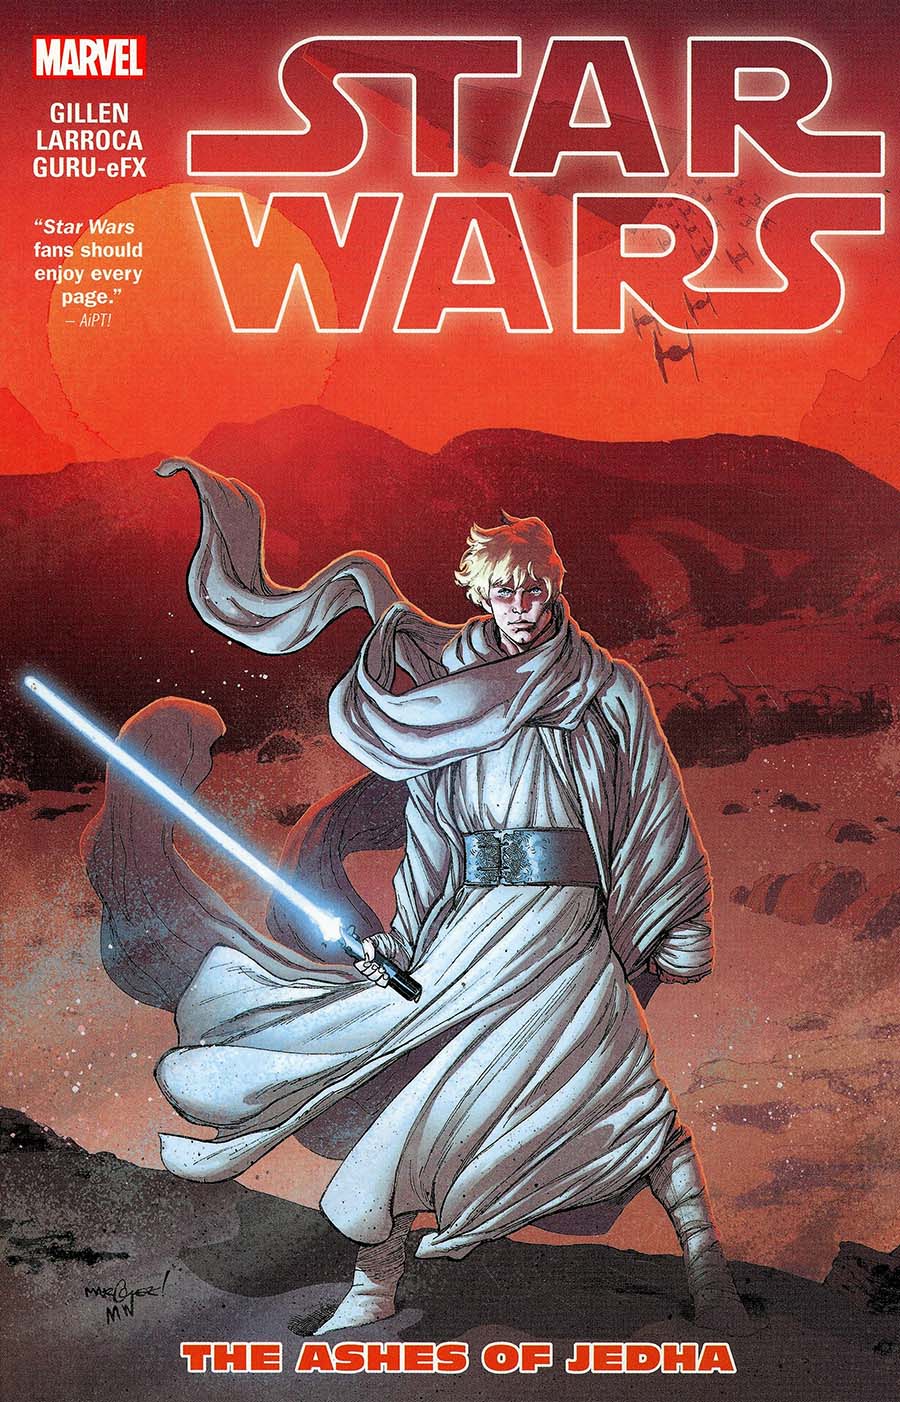 Star Wars (Marvel) Vol 7 Ashes Of Jedha TP